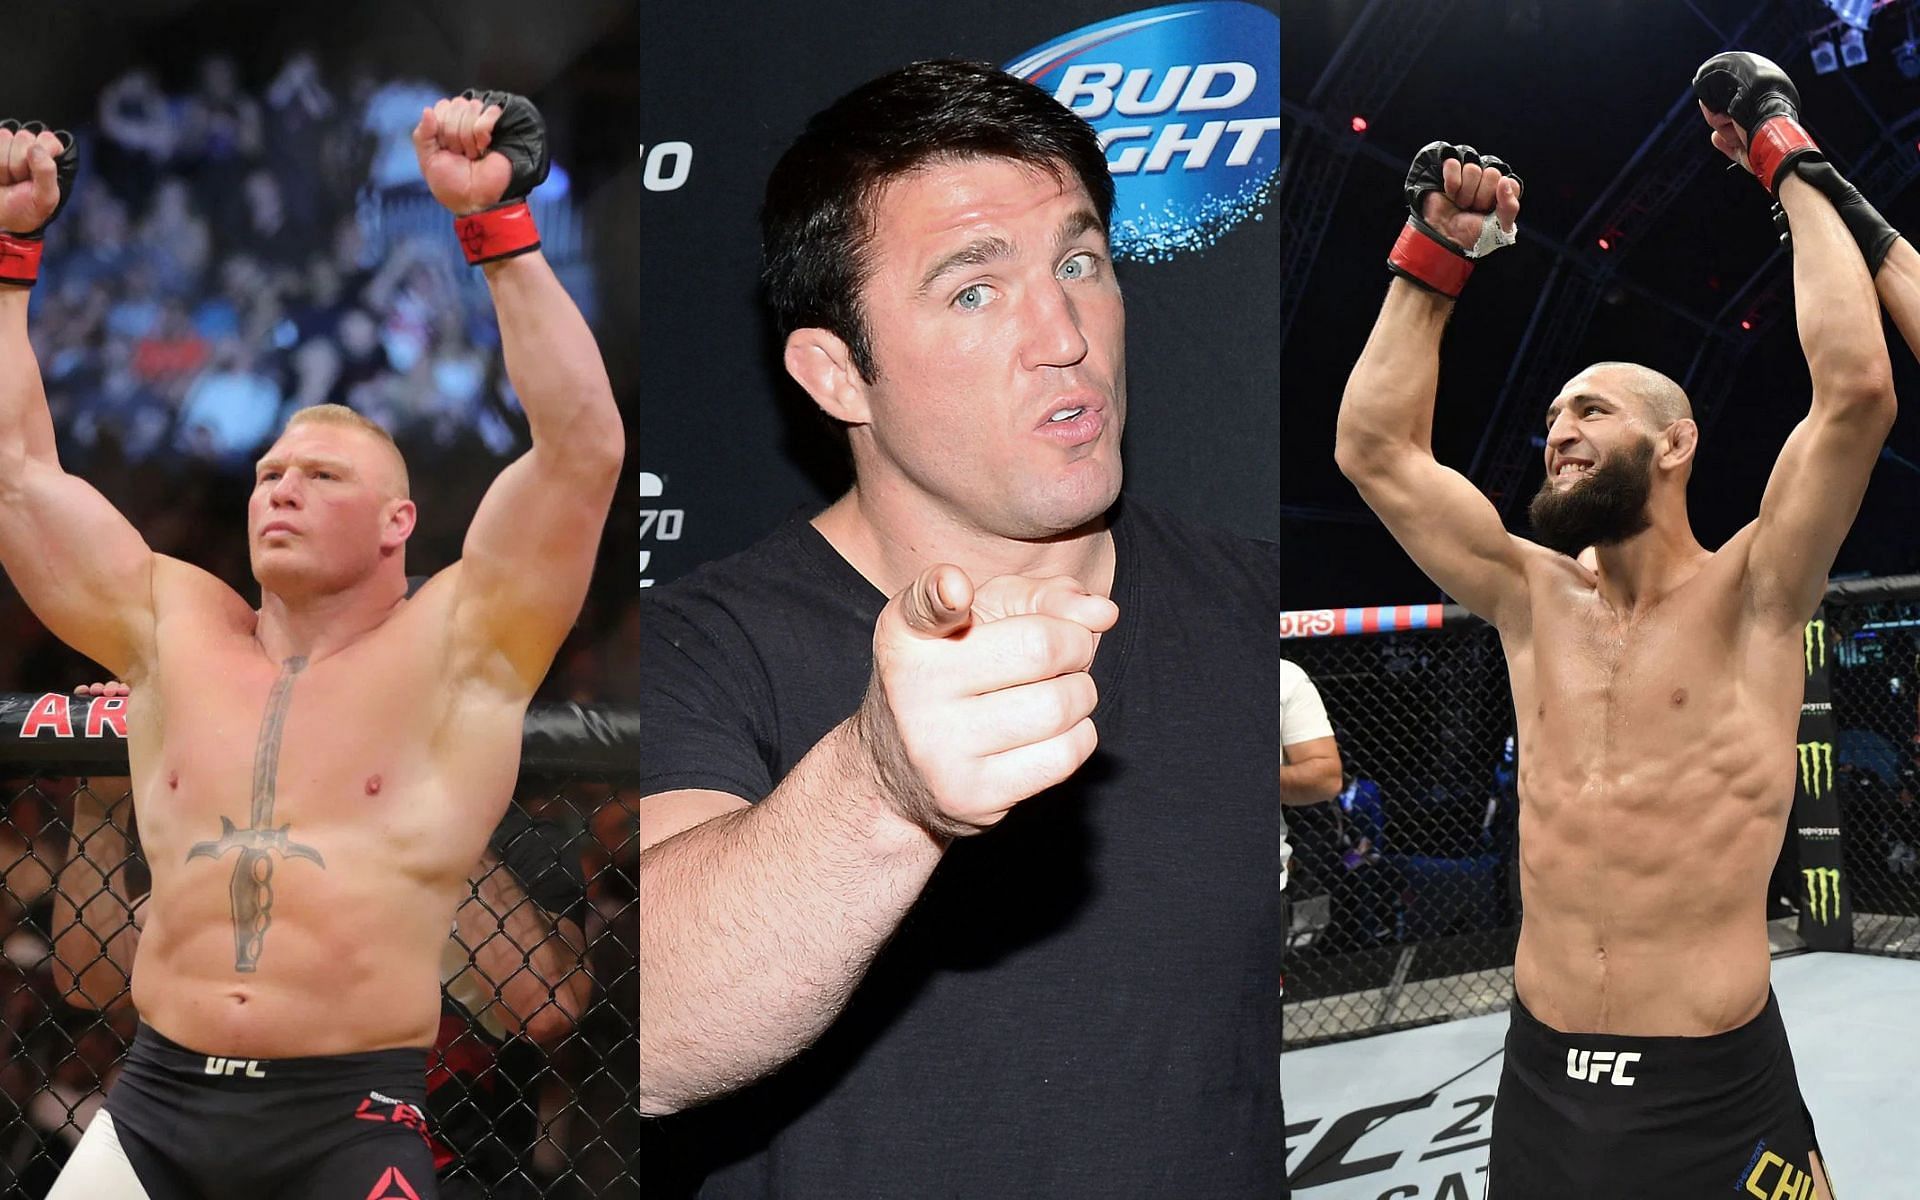 Brock Lesnar (Left), Chael Sonnen (Middle), and Khamzat Chimaev (Right) (Images courtesy of Getty)